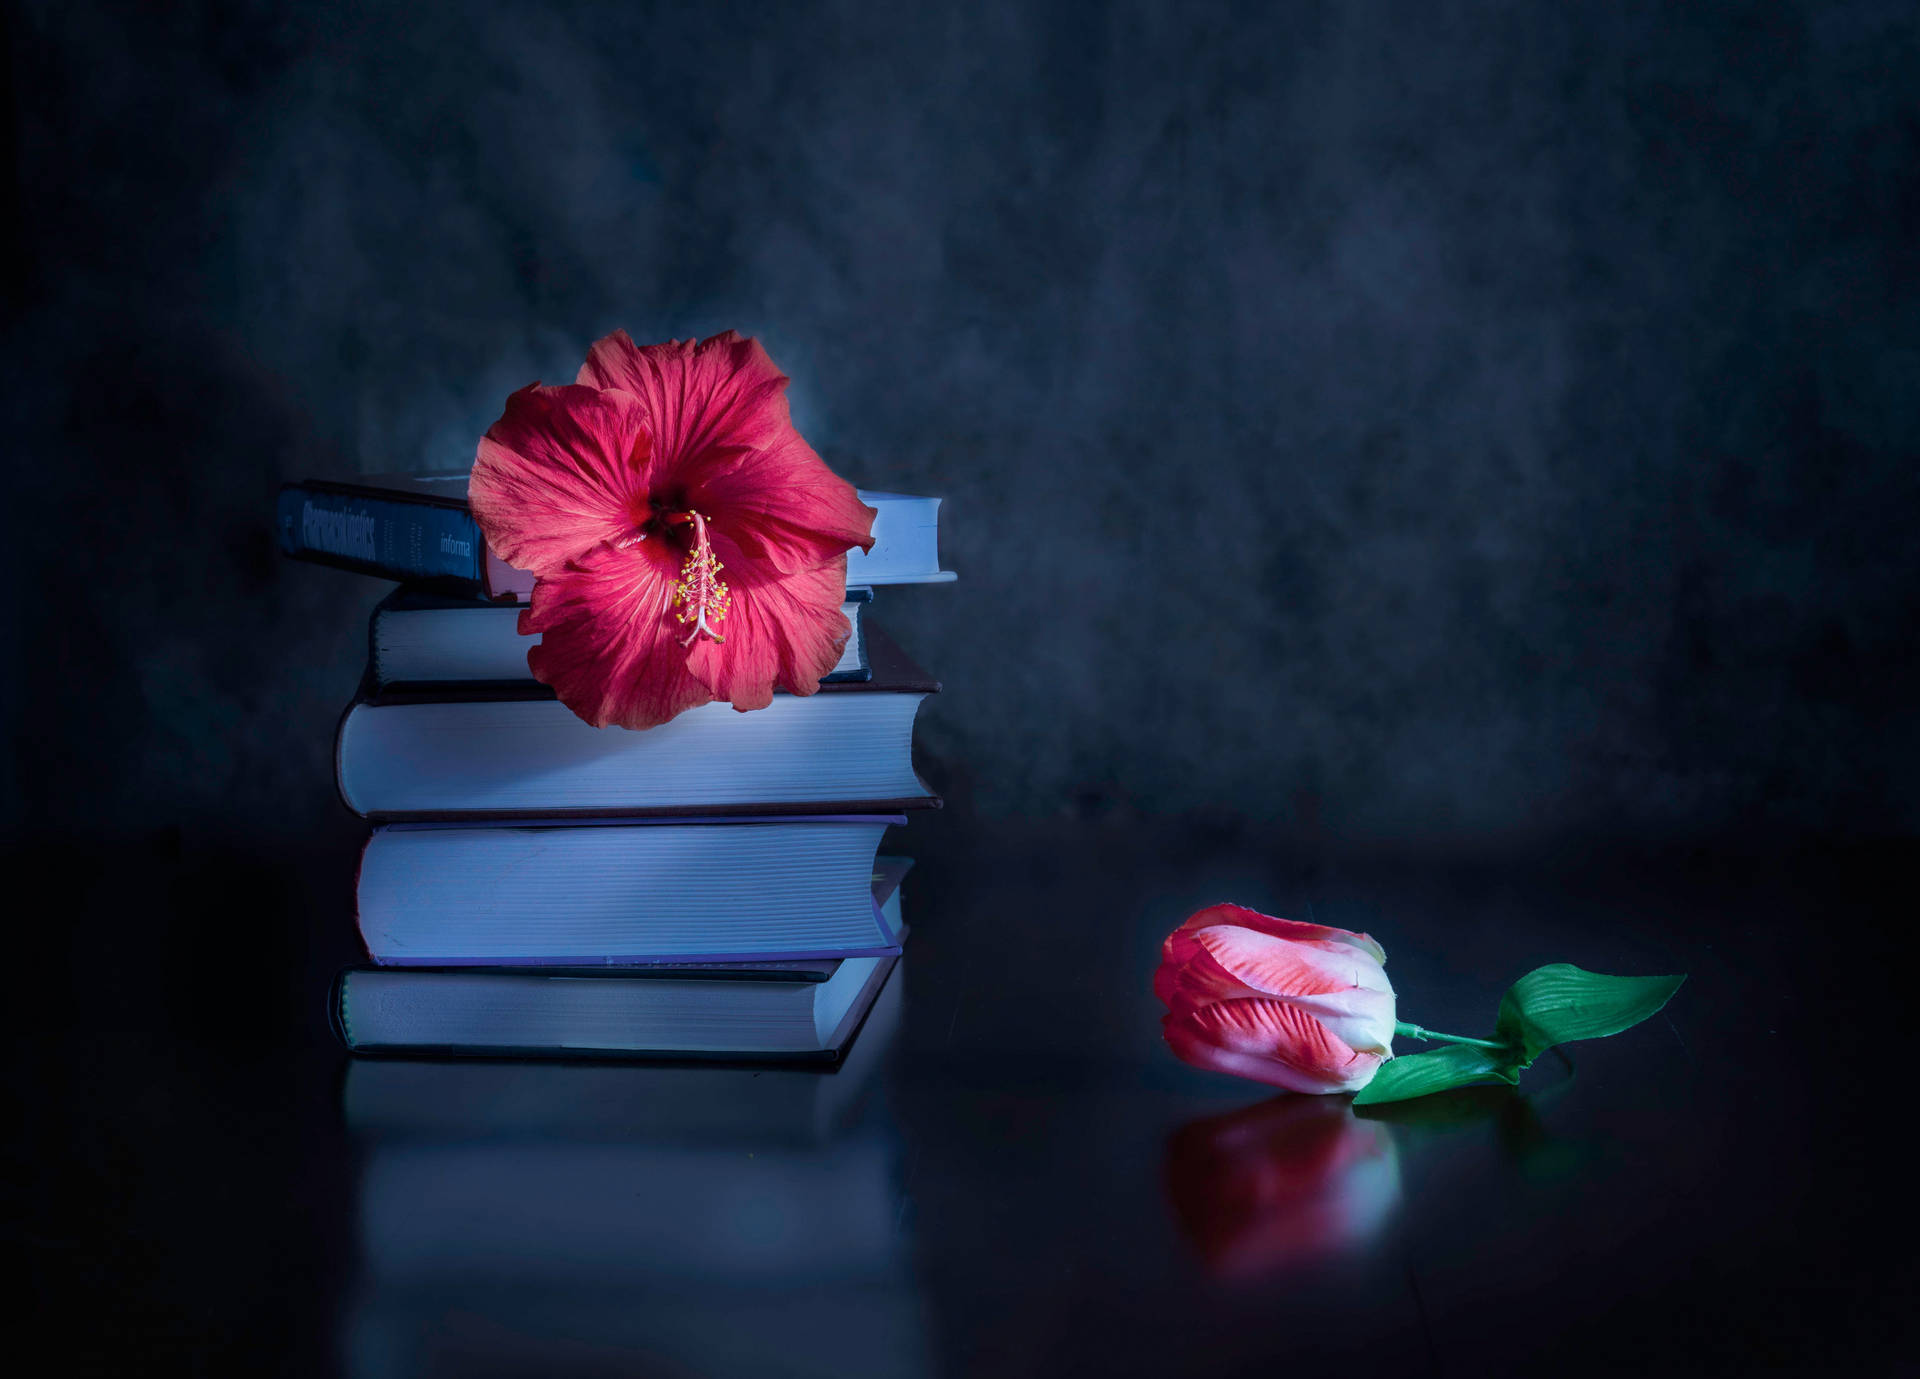 Dark Pink Floral And Books